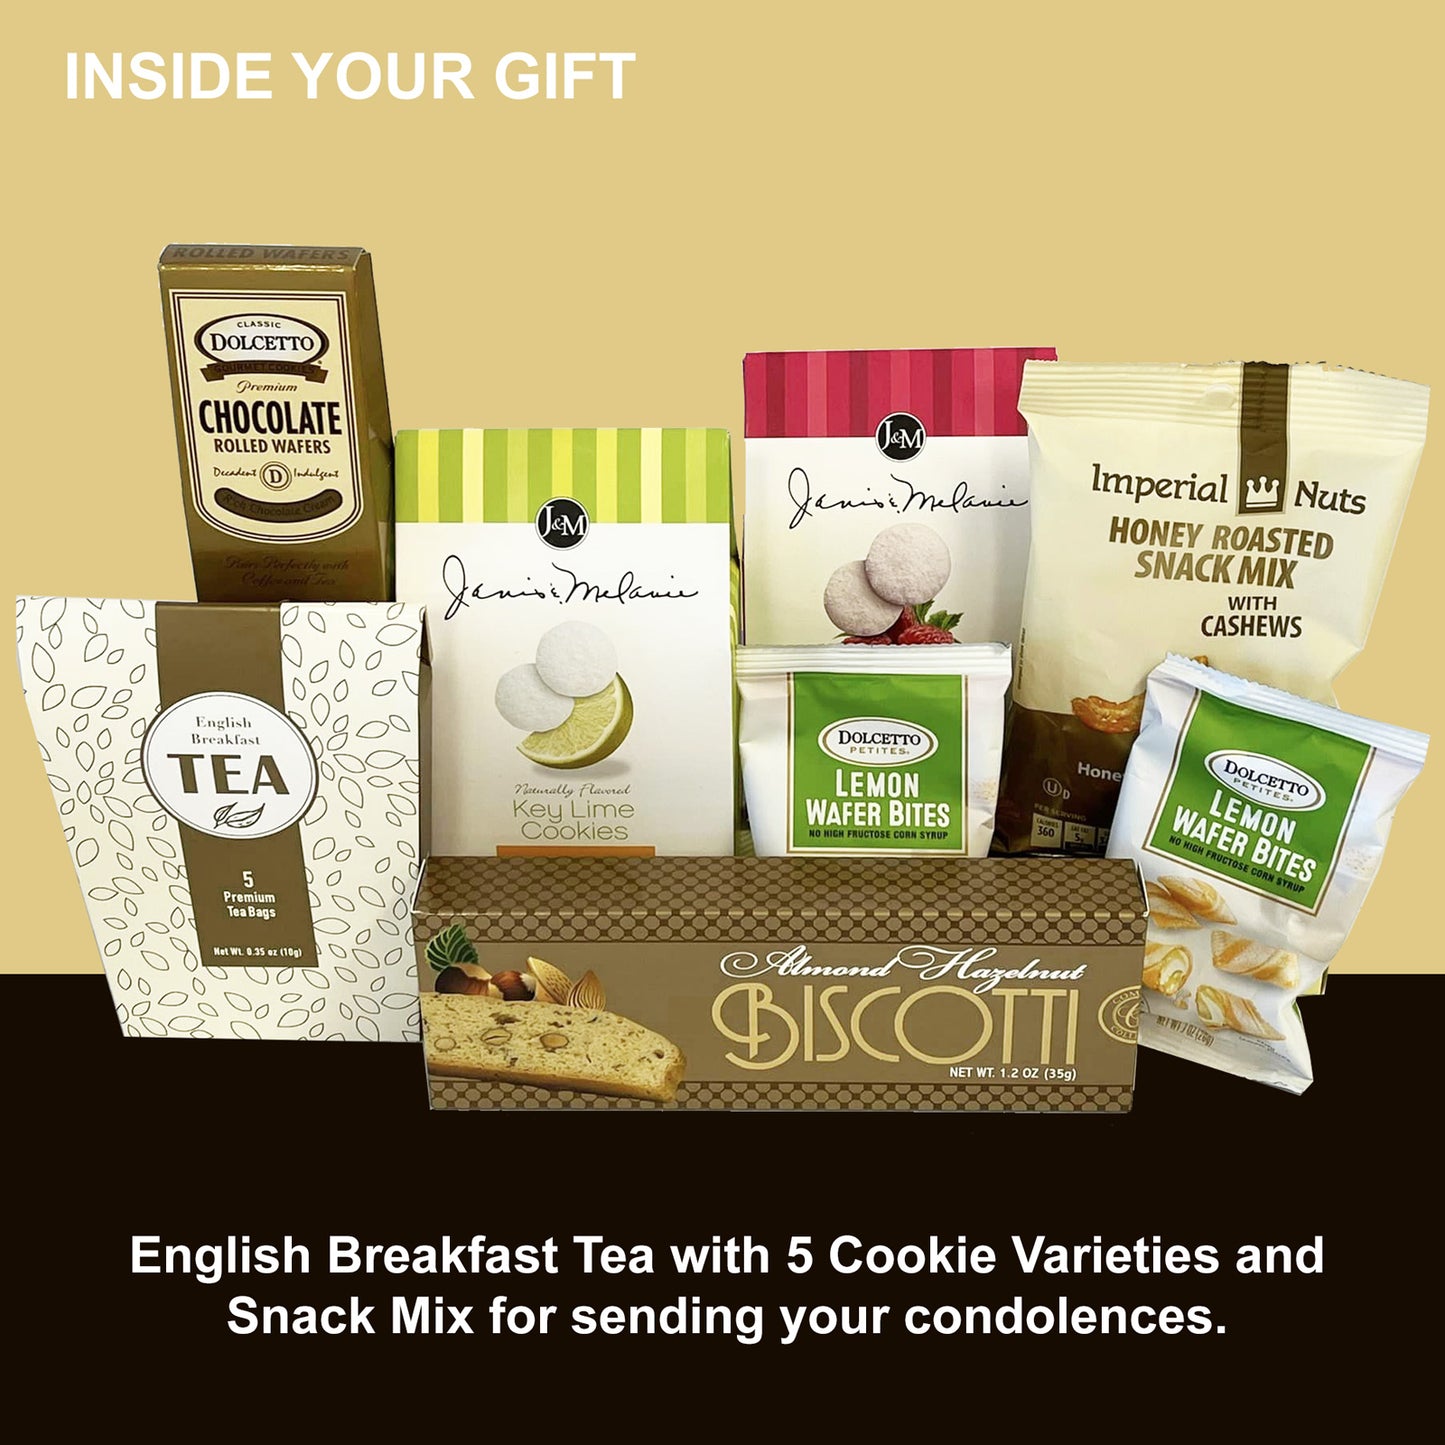 Sympathy Gift for Women with Tea and Cookies 